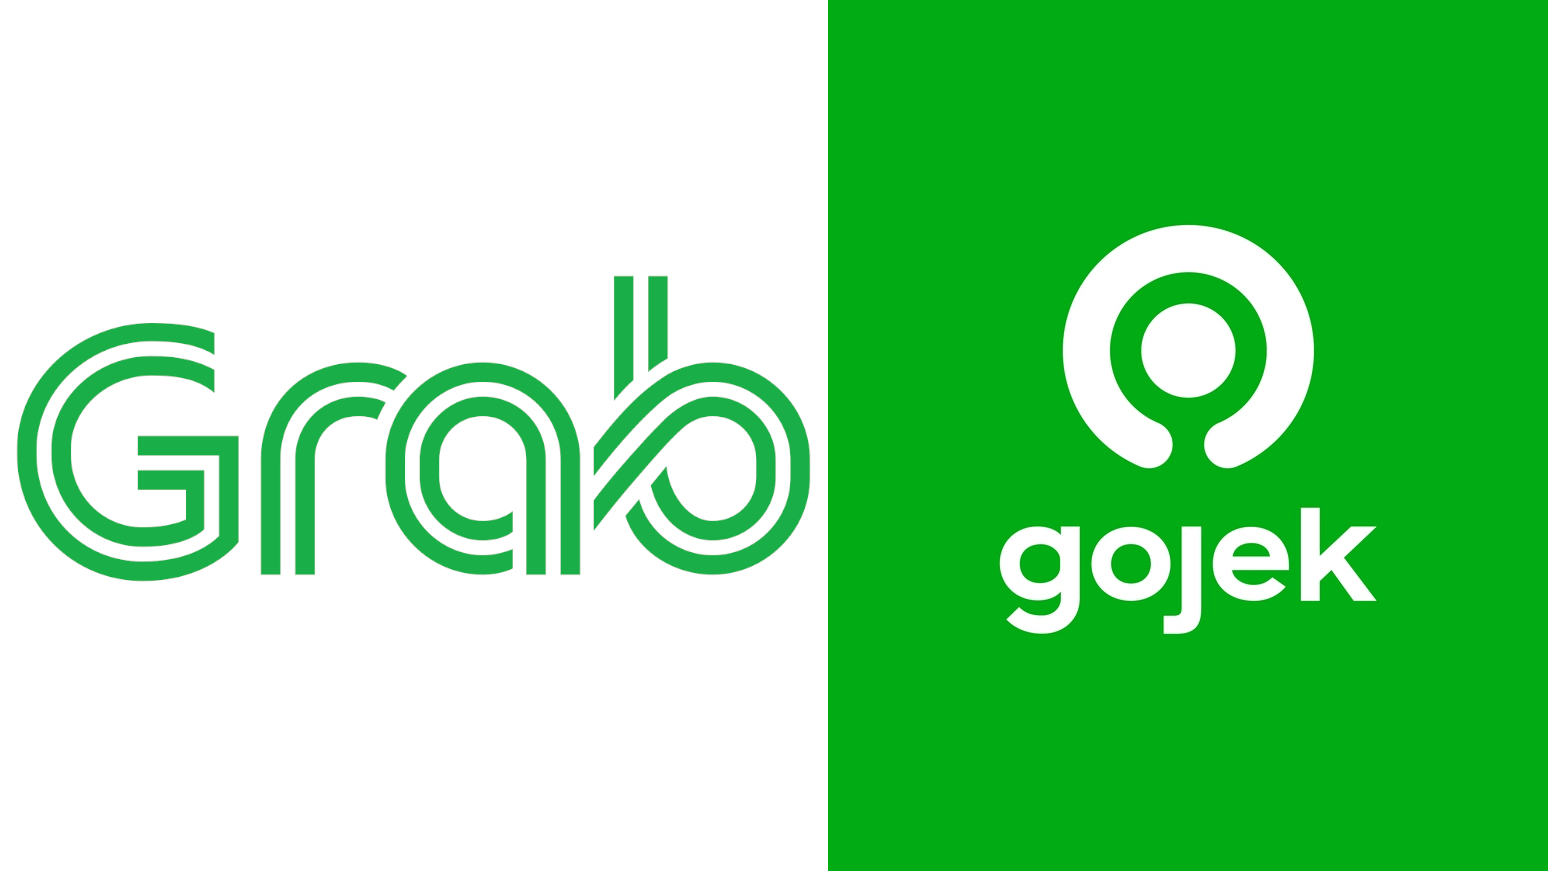  Grab  and Gojek  move closer to potential merger